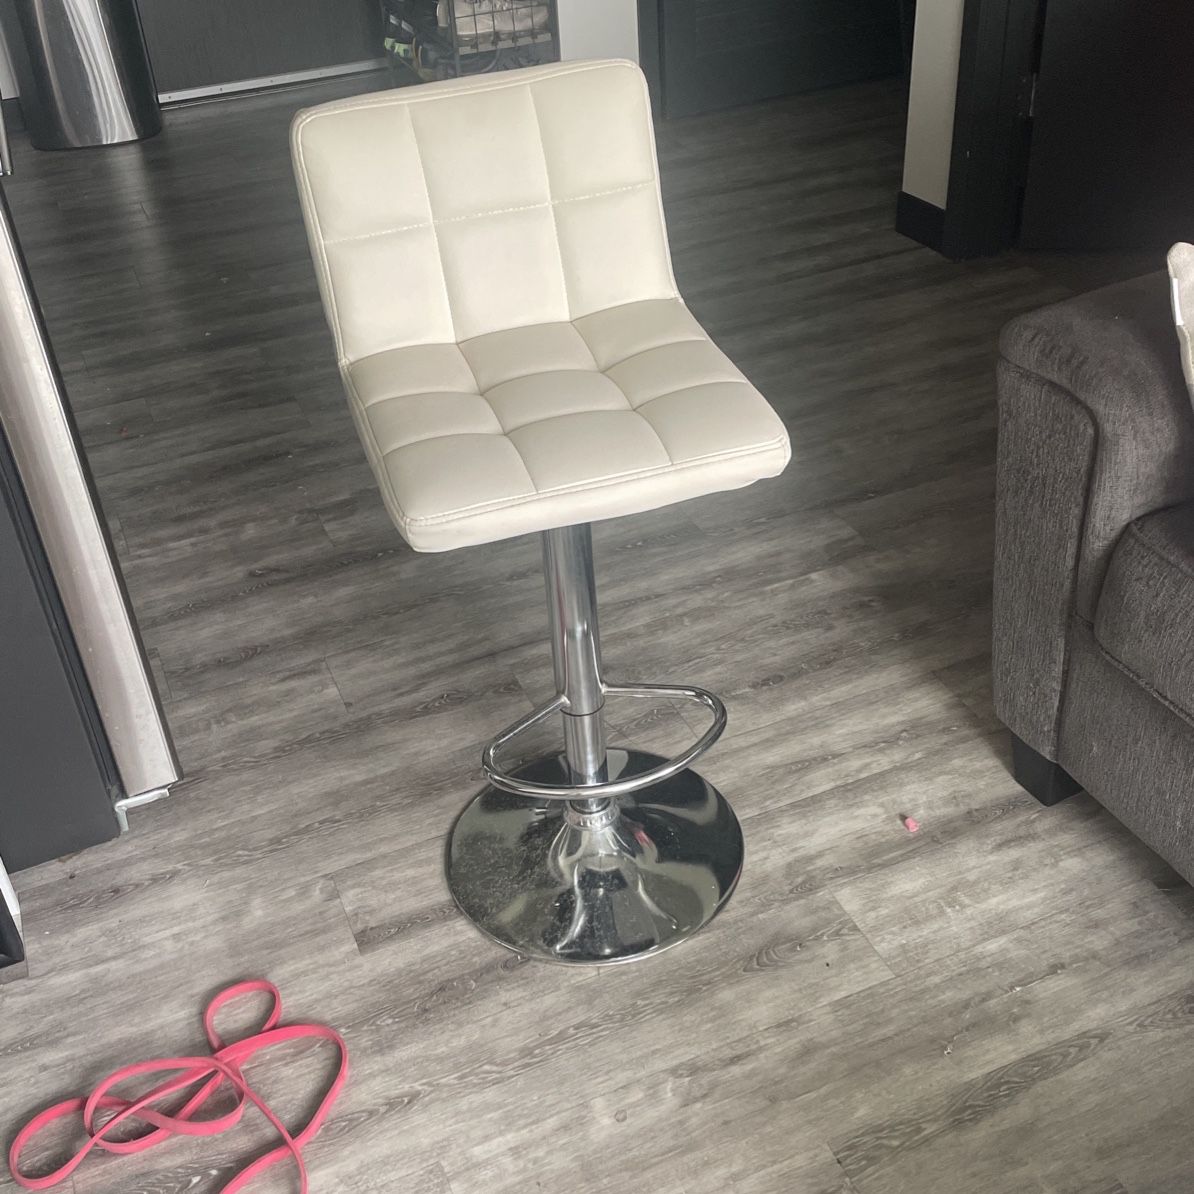 4 Barstools For Sale